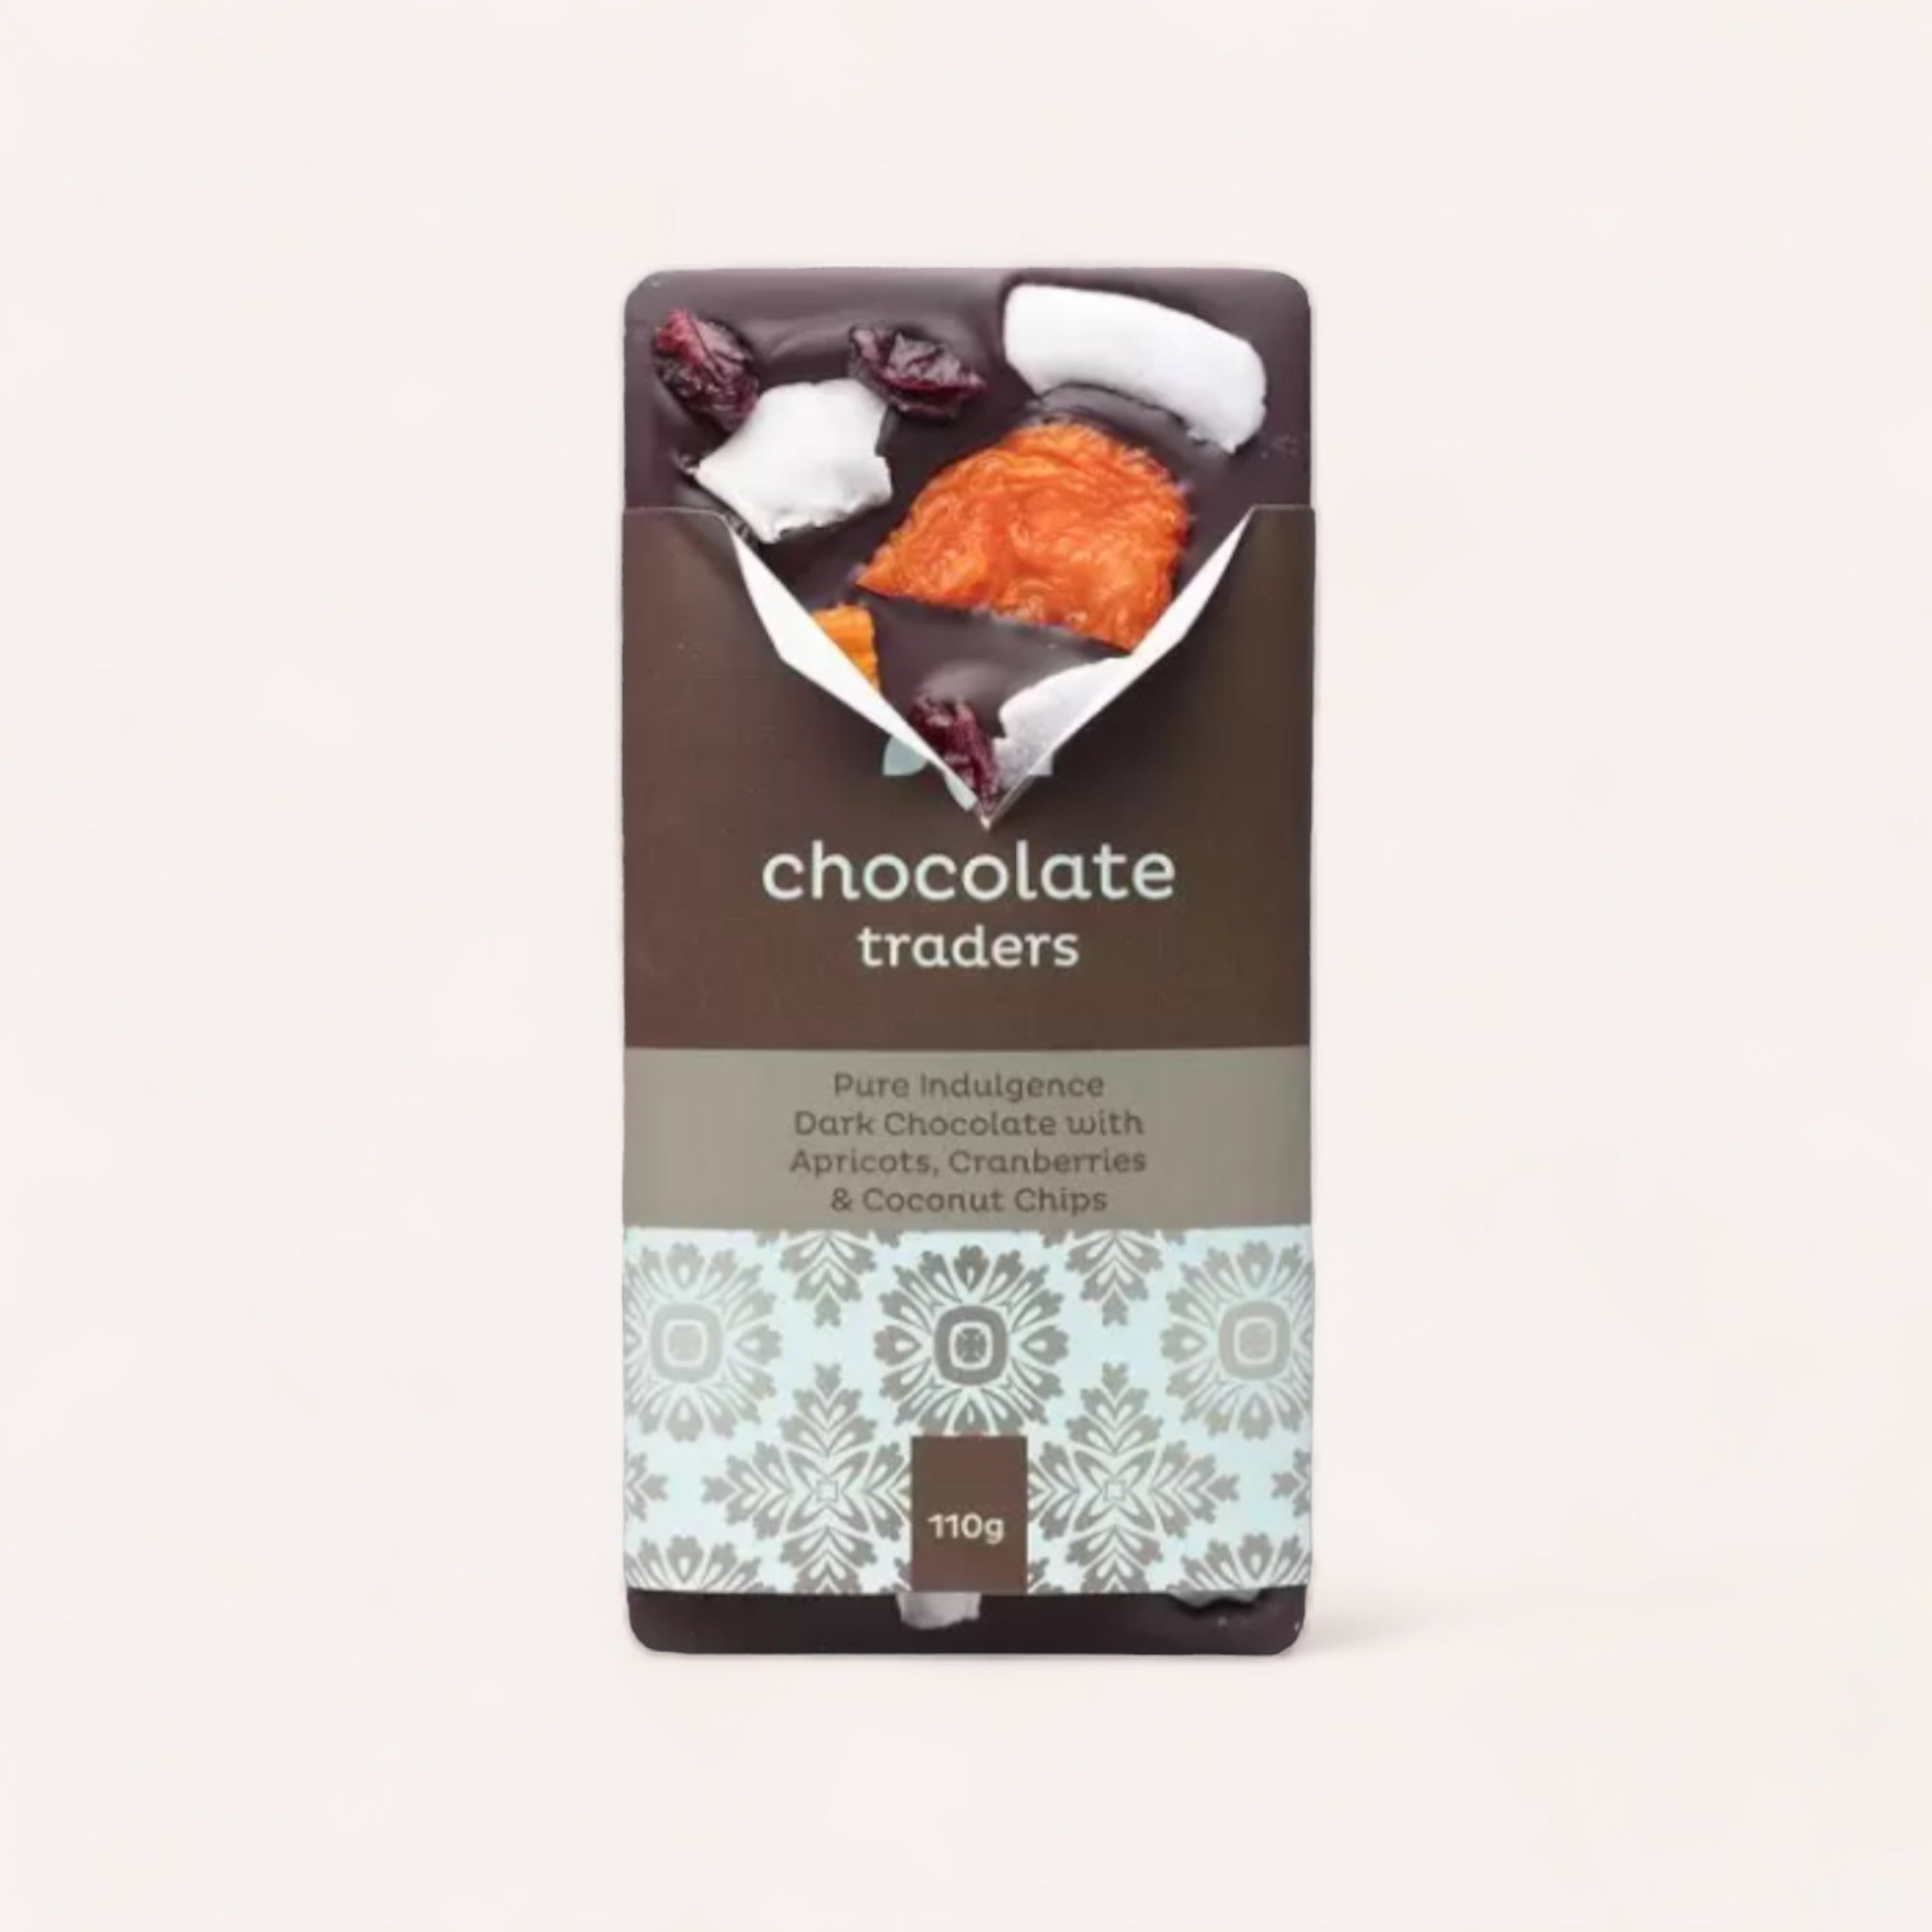 Artfully hand-crafted Pure Indulgence Apricots, Cranberries & Coconut Chips chocolate bar, presented in a stylish wrapper from New Zealand, epitomizing pure indulgence by Chocolate Traders.